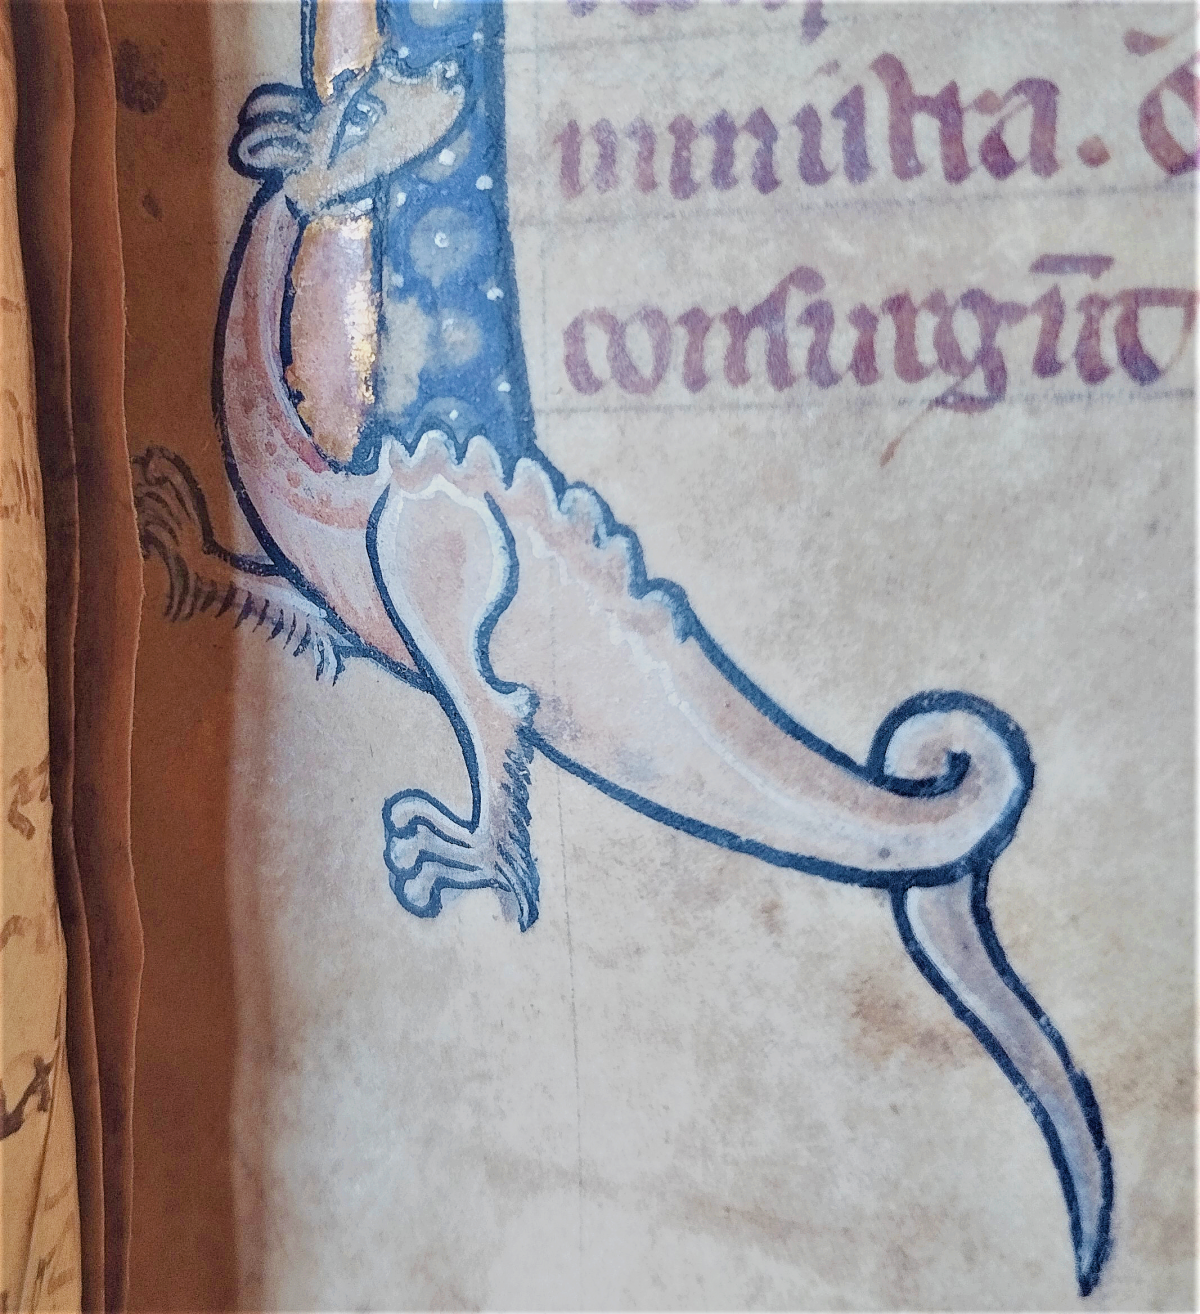 Decorative element in a corner of the page, showing unknown animal similar to a dragon, wingless with a long tail and two legs.